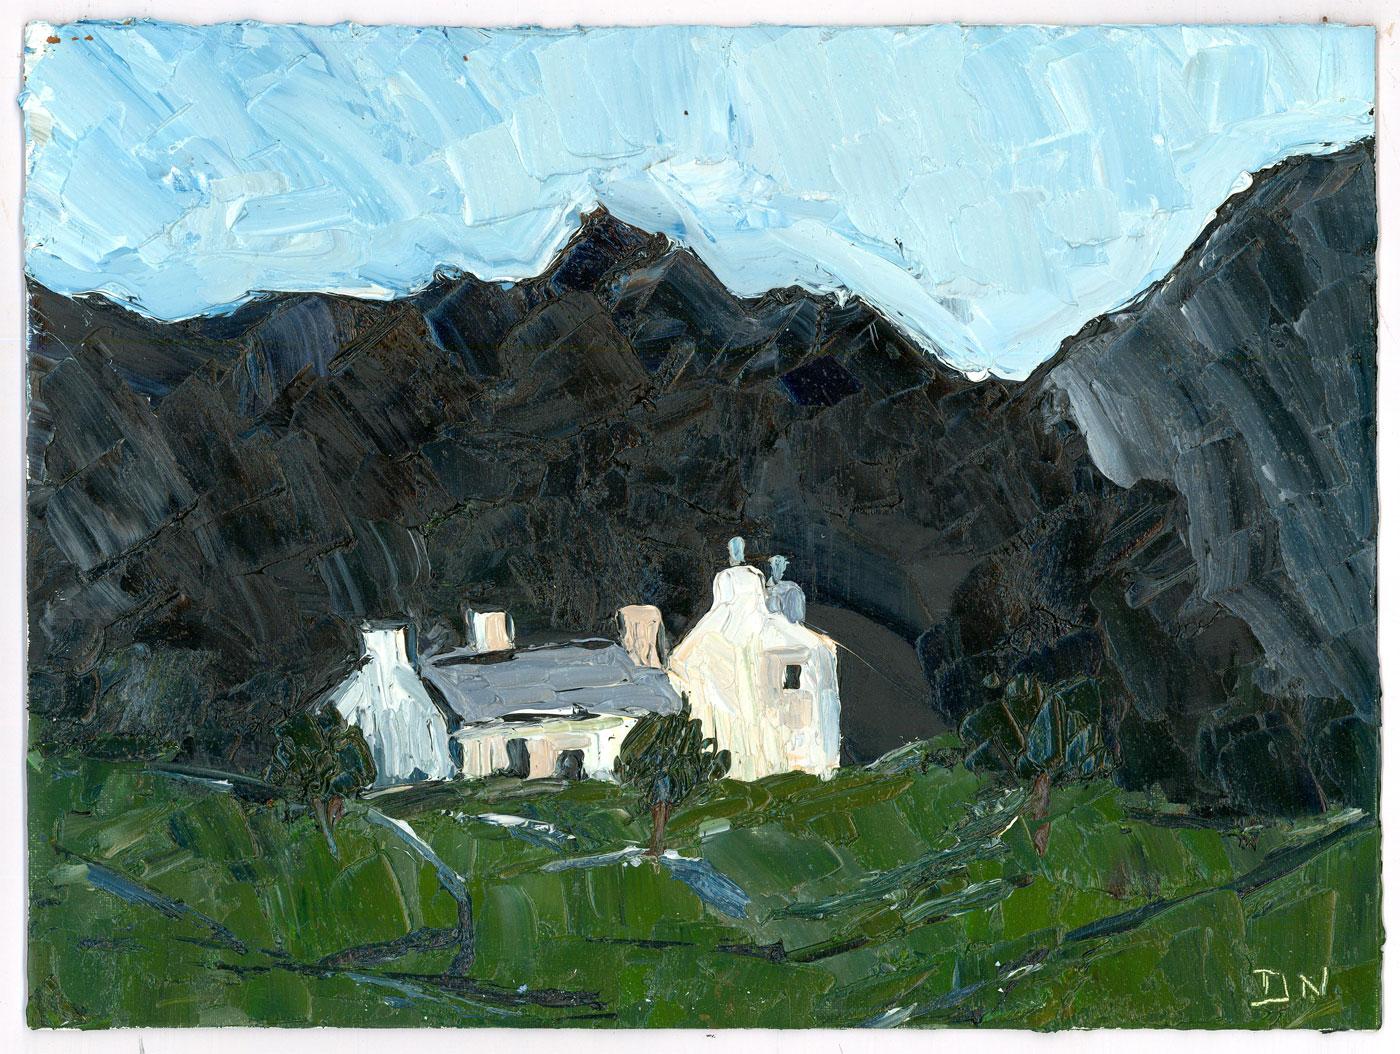 kyffin williams art for sale